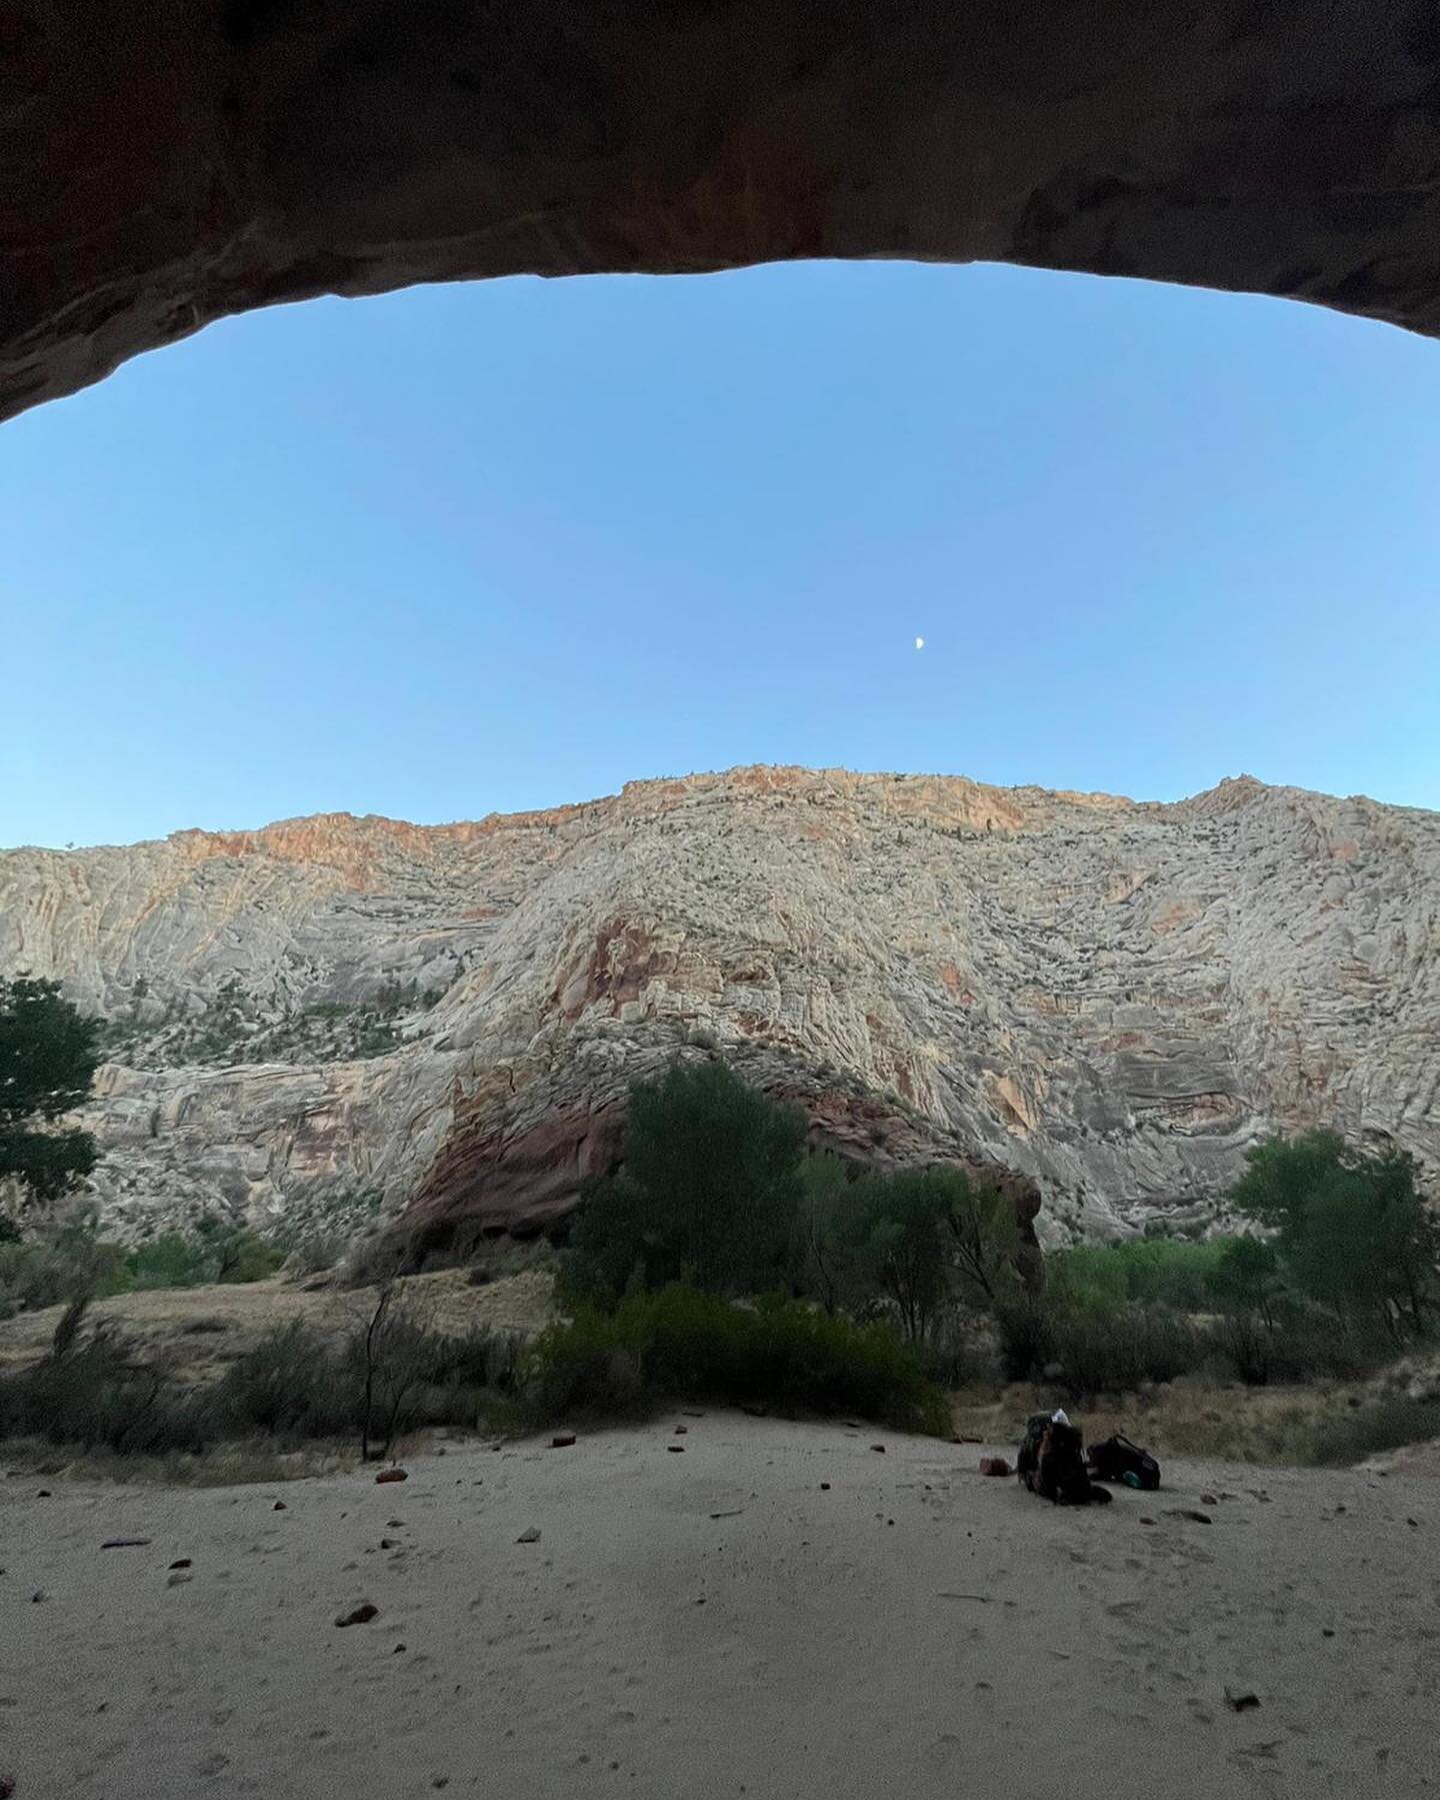 3 Day backpacking in Escalante River!